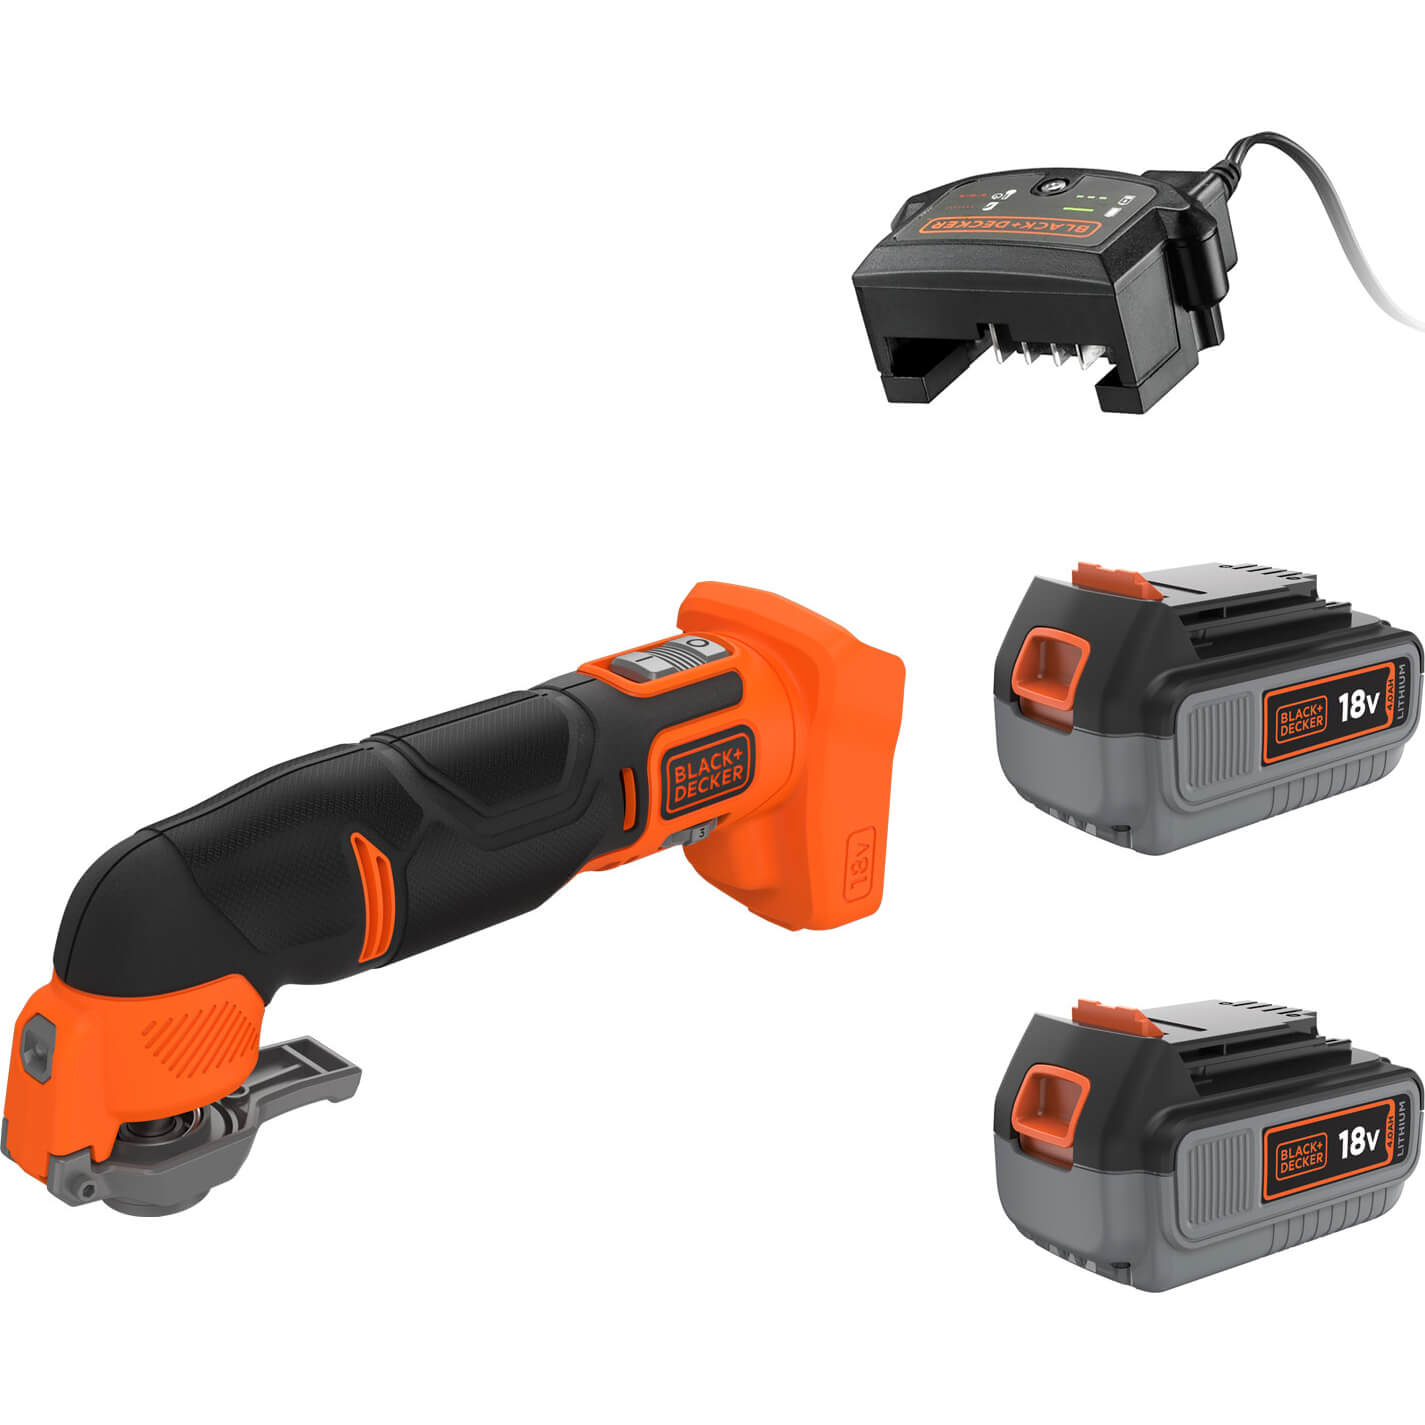 Black and Decker BDCOS18 18v Cordless Oscillating Multi Tool 2 x 4ah Li-ion Charger No Case with Accessories